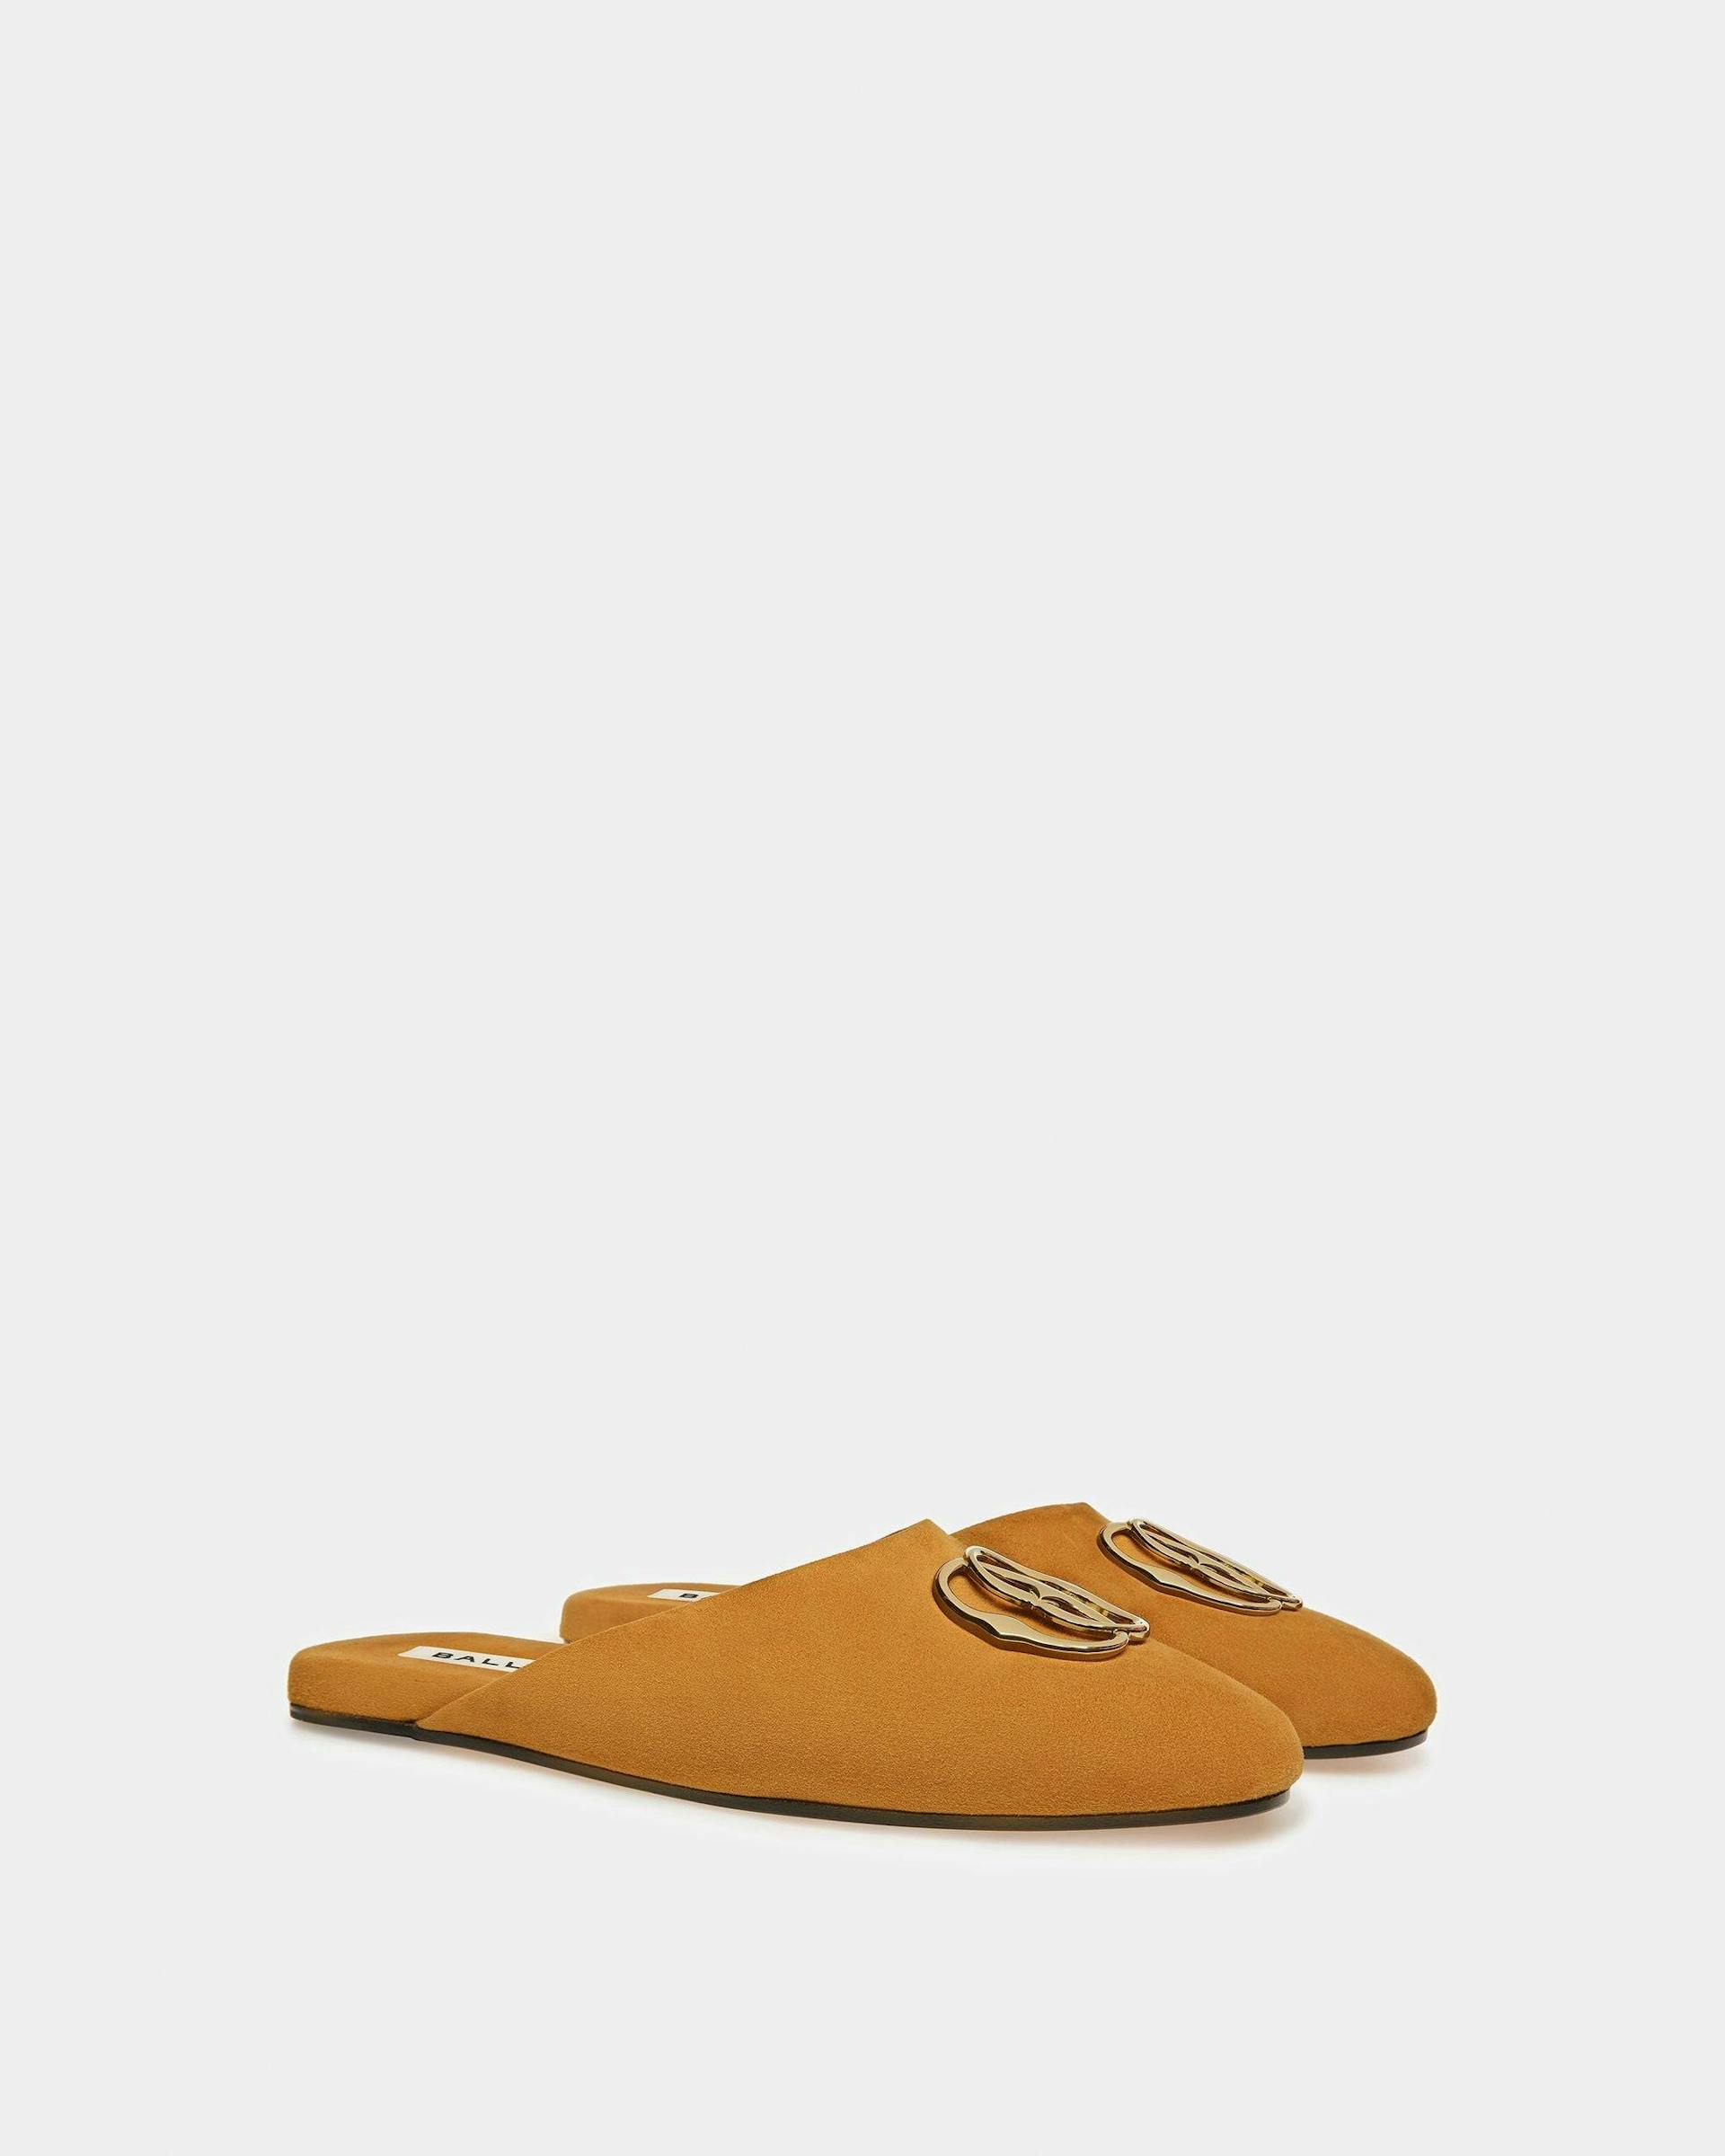 Emblem Loafer In Suede - Women's - Bally - 03